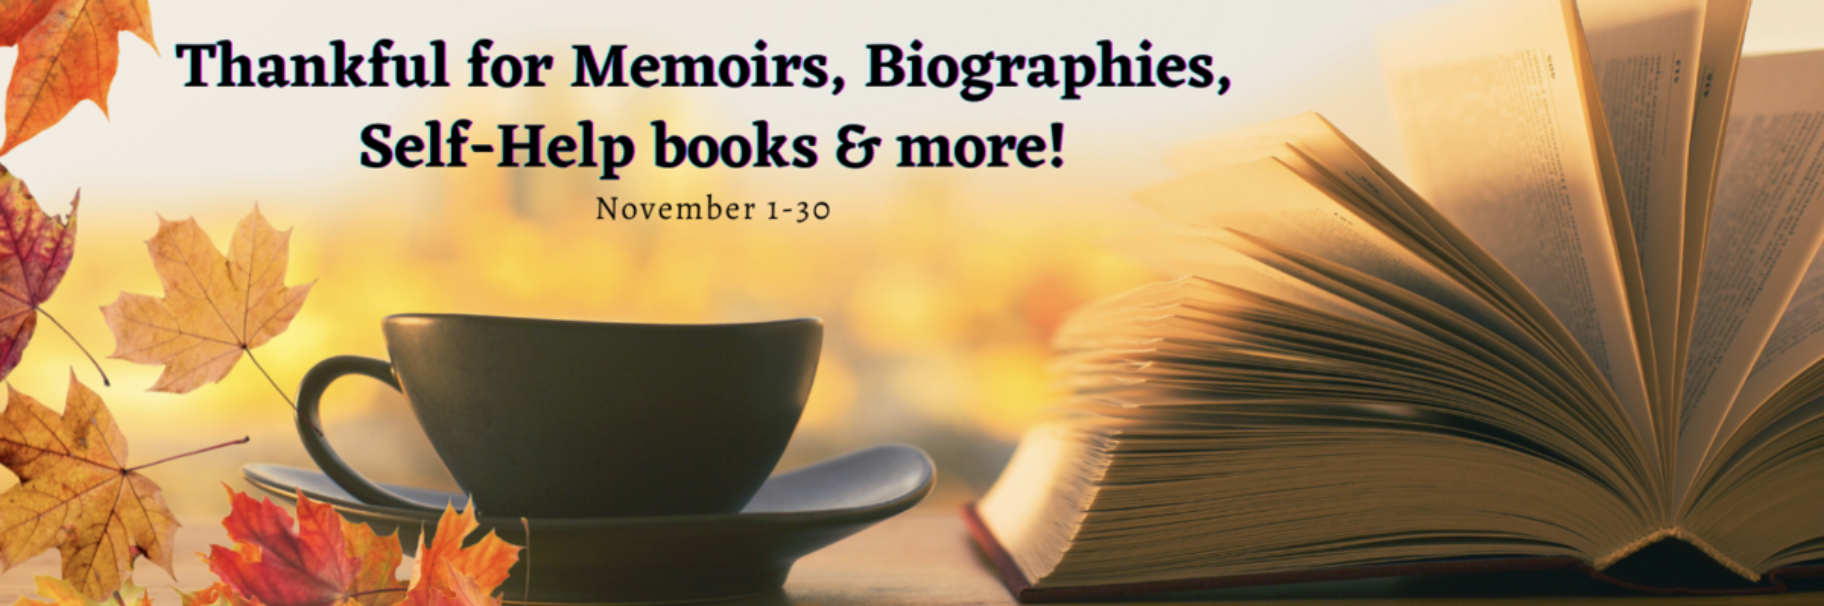 Thankful for Memoirs, Biographies, Self-Help books & more!